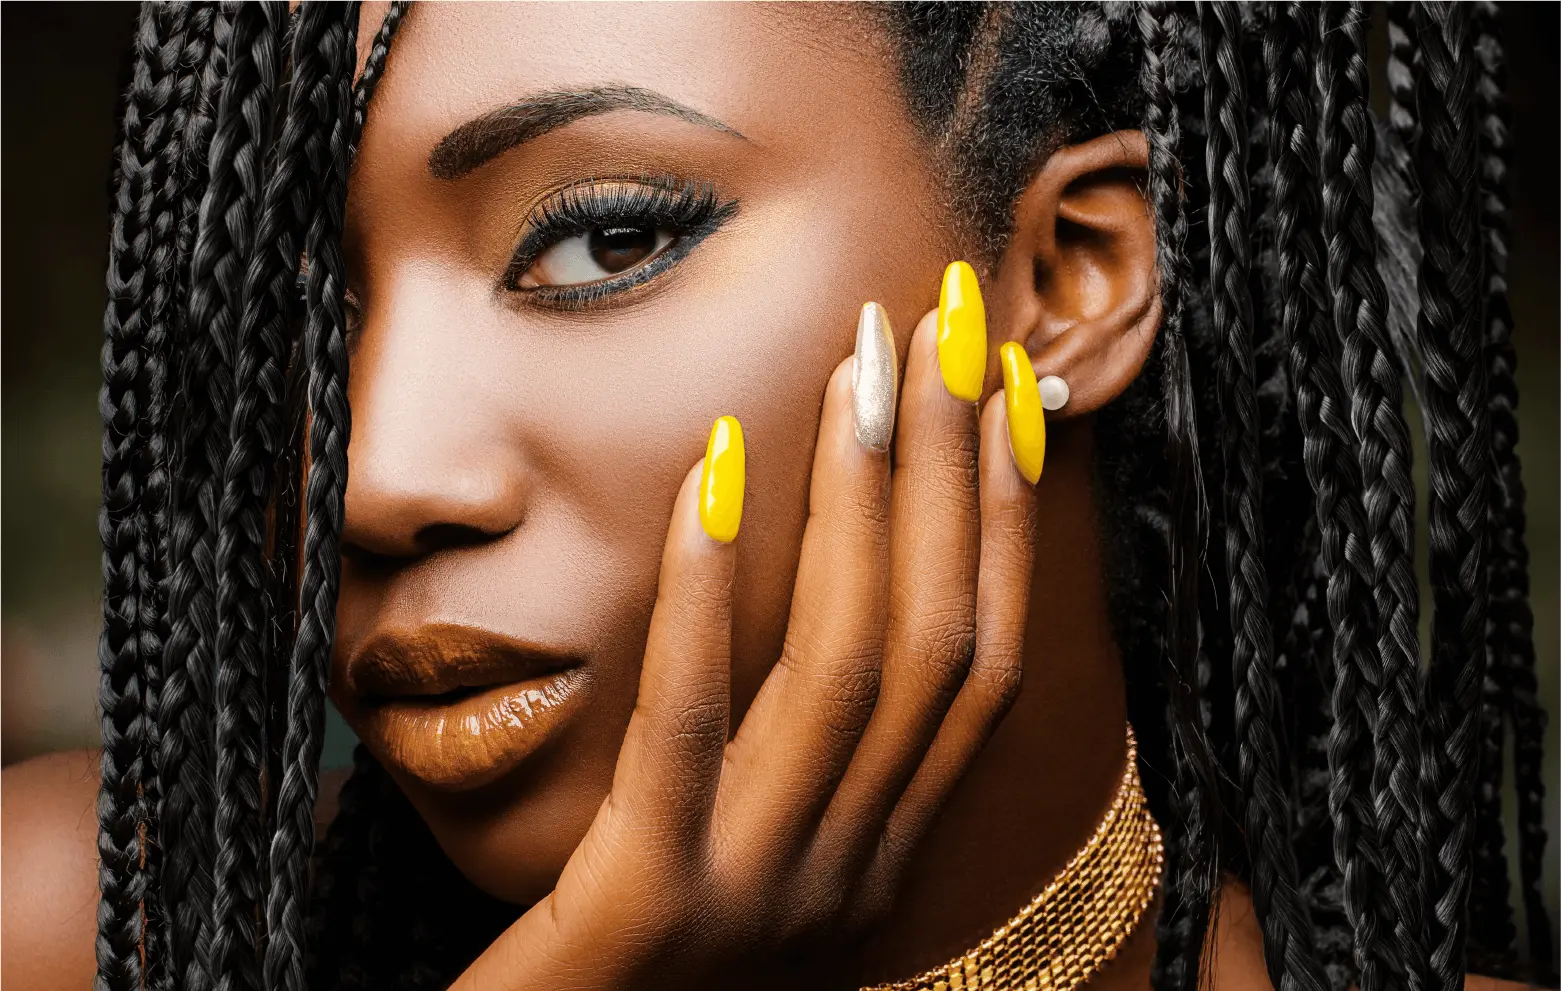 close-up of person with long braids, full glam makeup, and hand with nail art touching the side of their face